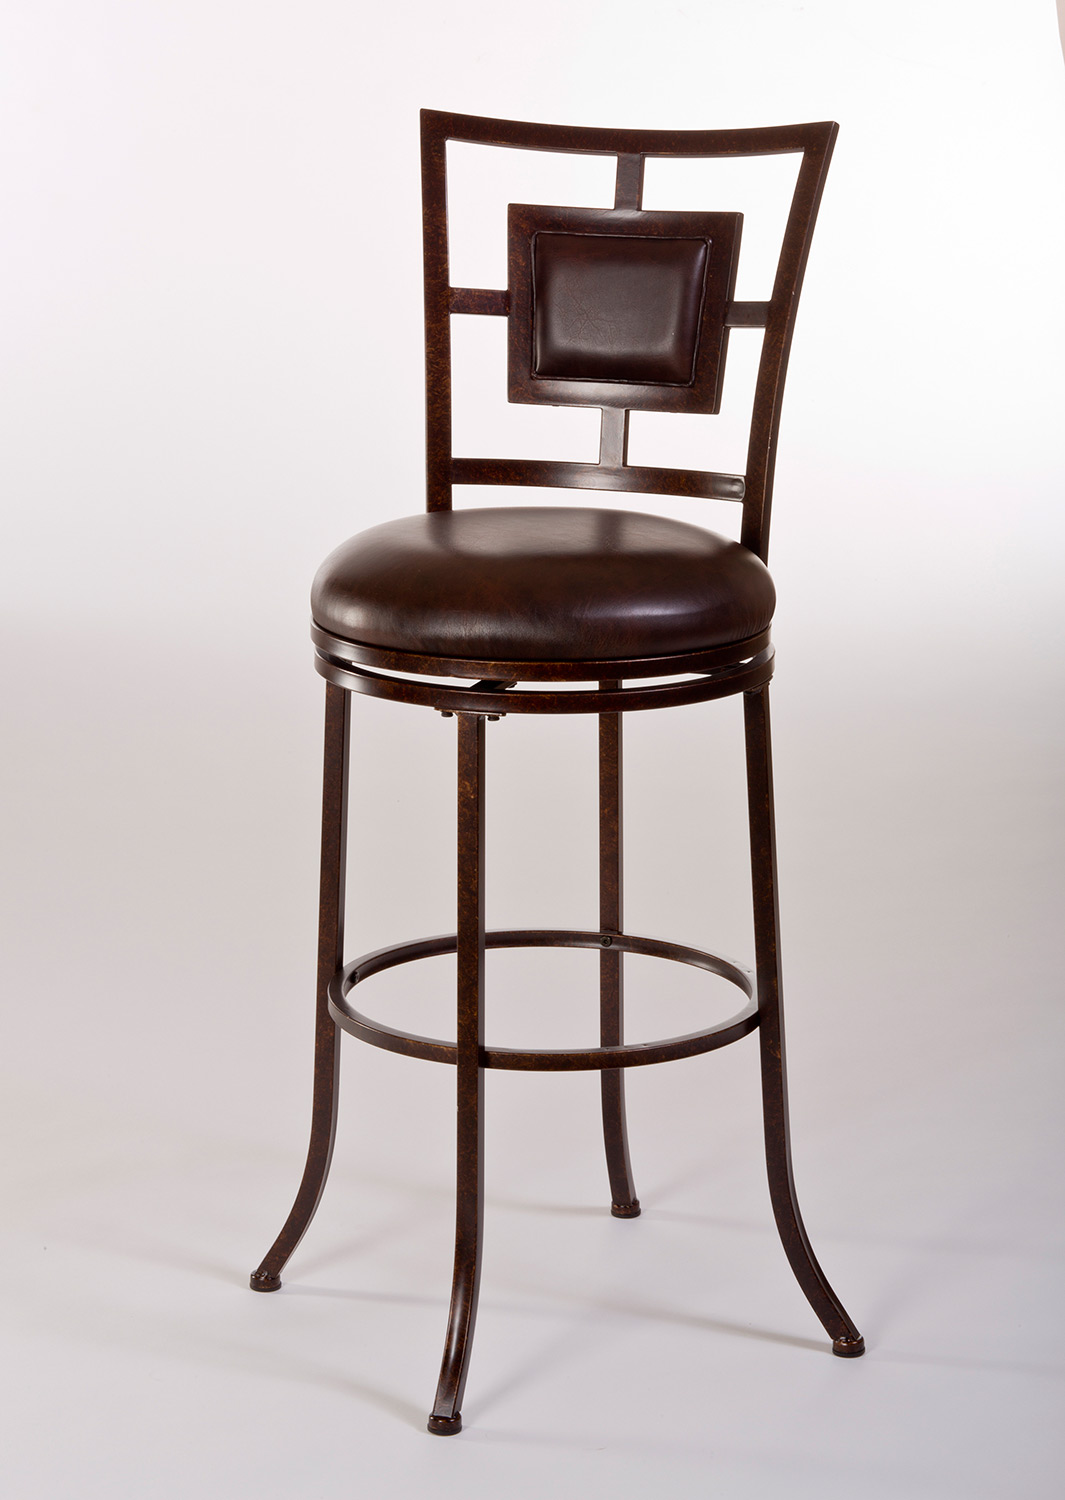 Hillsdale Foxholm Swivel Counter Stool - Antique Copper/Dark Brown PU